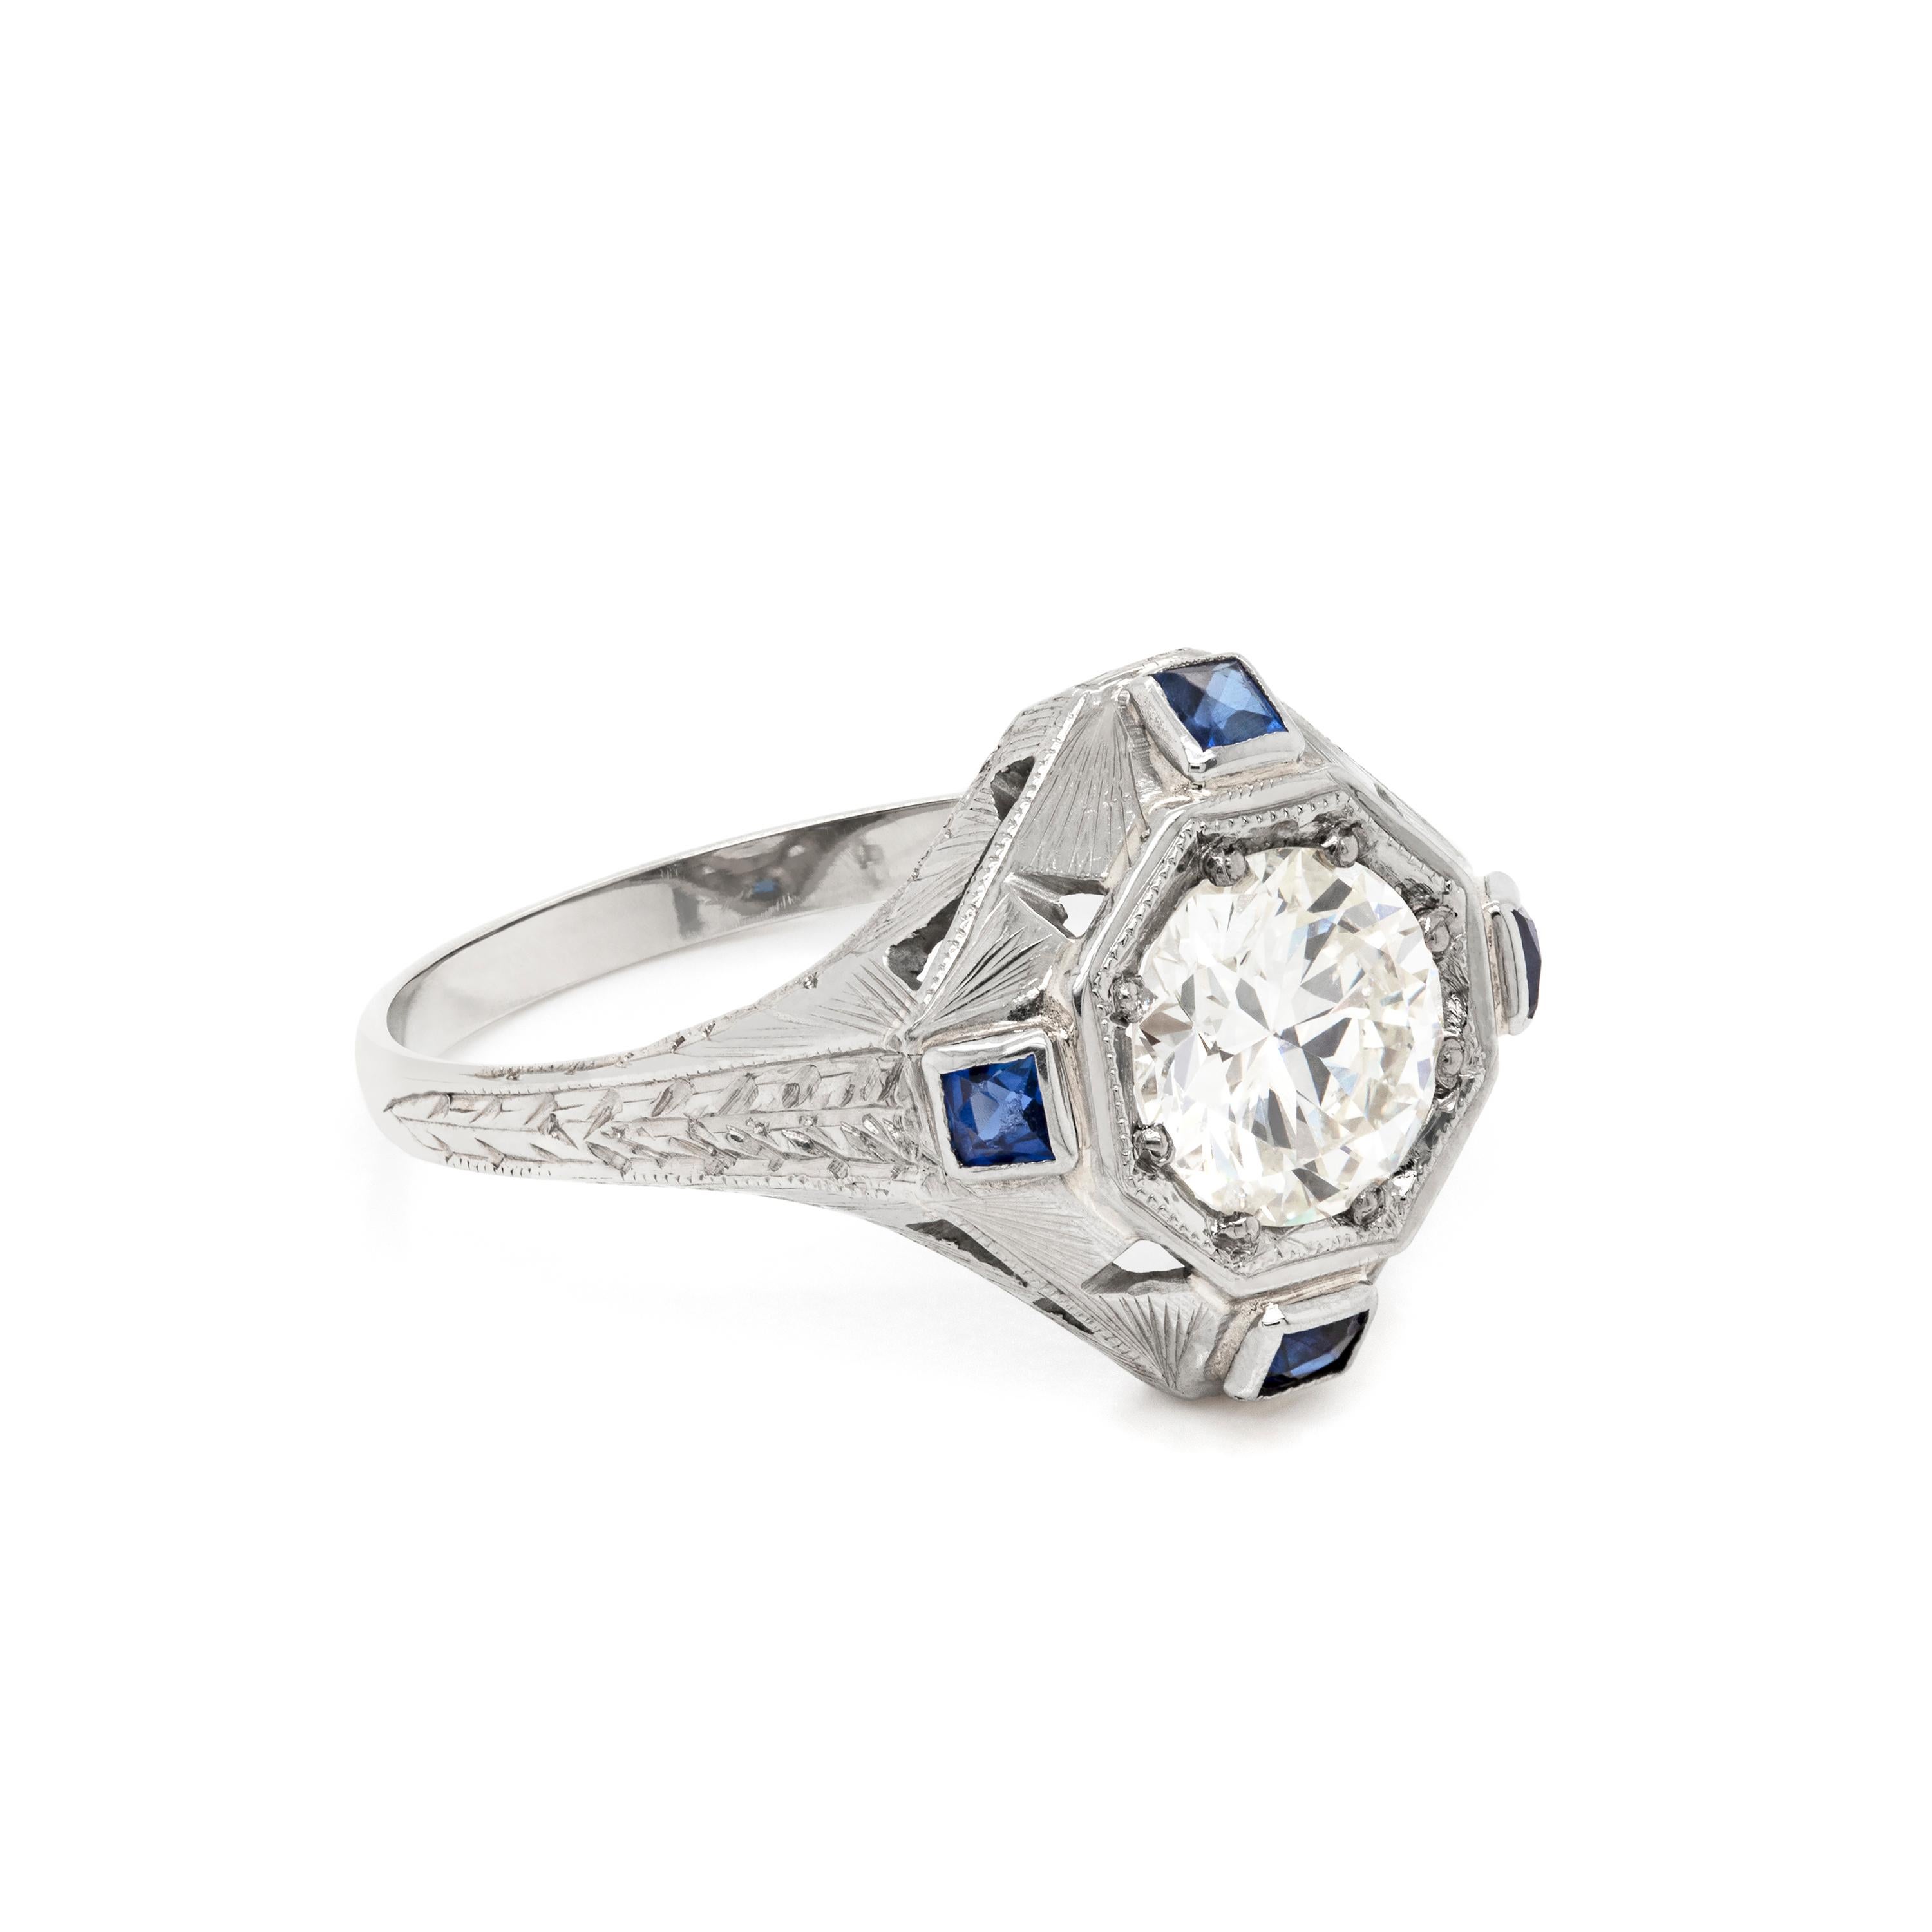 This 1930's Art Deco handmade target engagement ring features a 1.14ct transitional cut diamond, grain set into a square shaped target mount. The diamond is beautifully accompanied by four square shaped synthetic blue sapphires, rub-over set on each